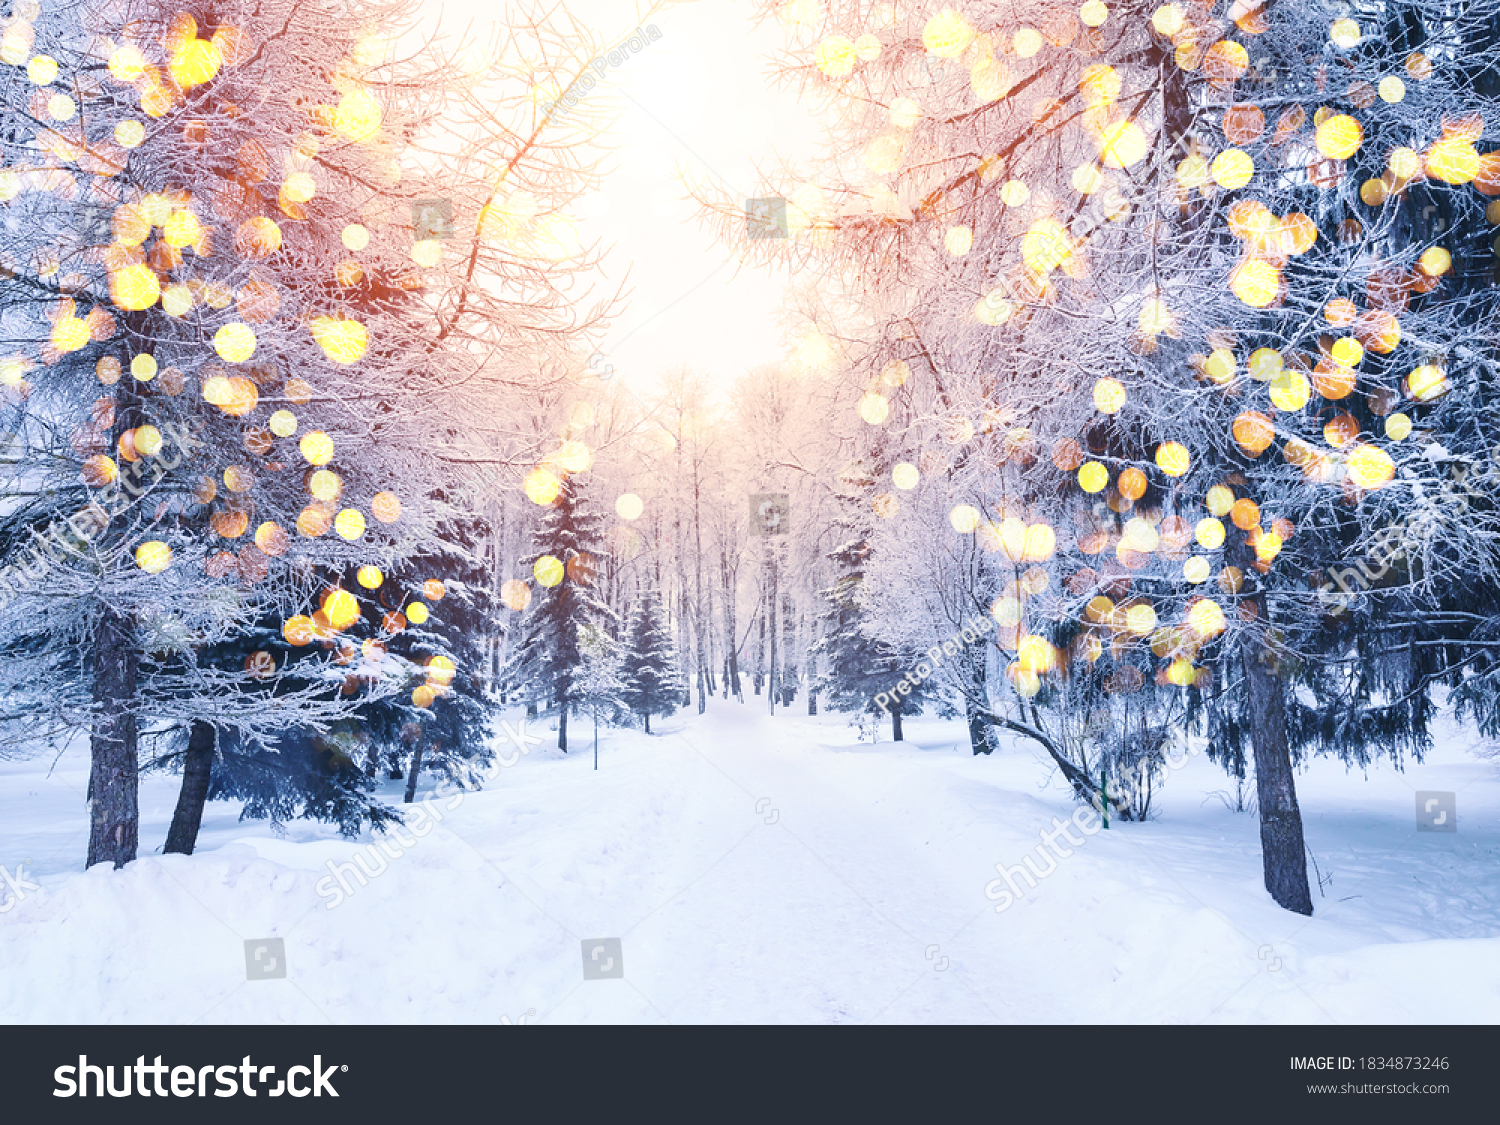 Winter fir tree christmas scene with sunlight. Fir branches covered with snow. Christmas winter blurred background with garland lights, holiday festive background.  #1834873246